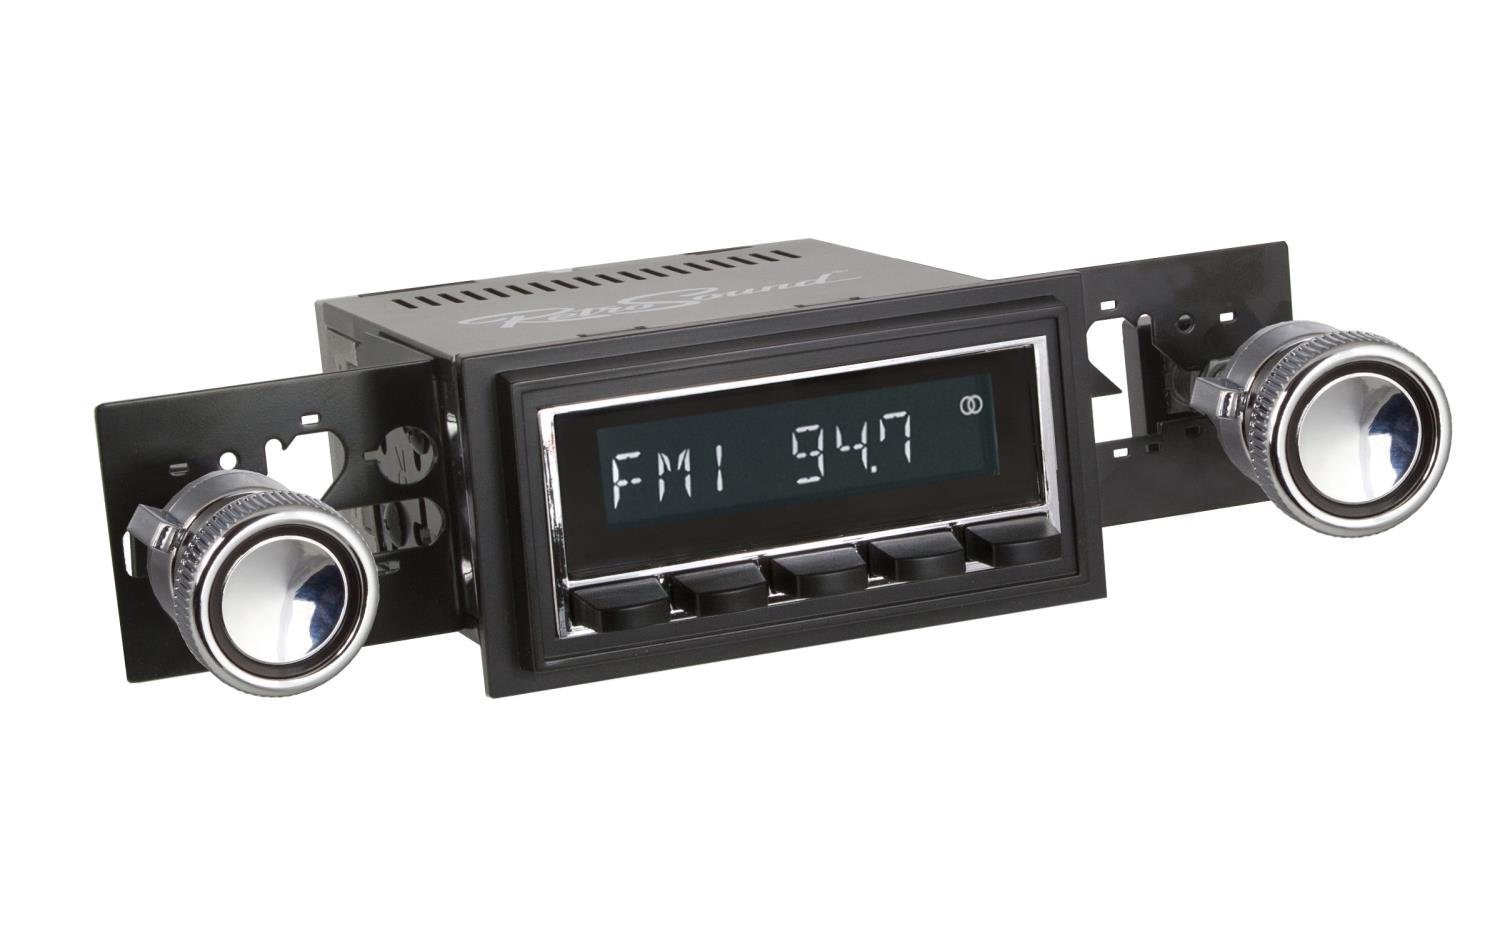 HCB-M2-226-08-80 Motor 2B Radio w/Chrome Face, Black Pushbuttons & Installation Bezel & Knobs Kit, 1967 Ford Mustang